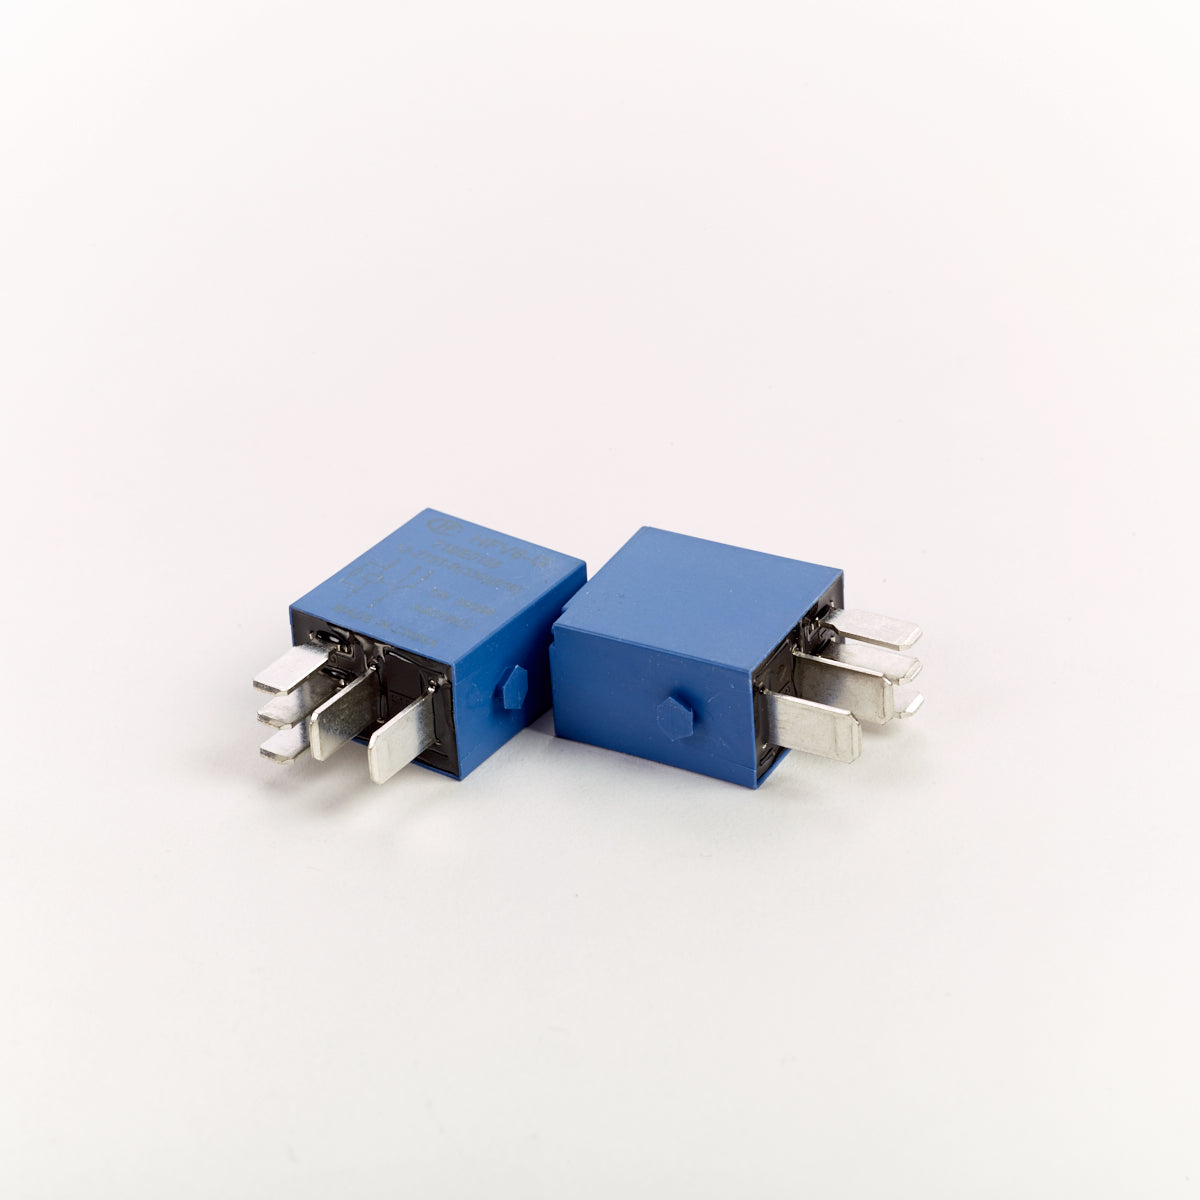 RELAY MICRO 35/20A 12V - BLUE (Pack of 2): 716/E0156